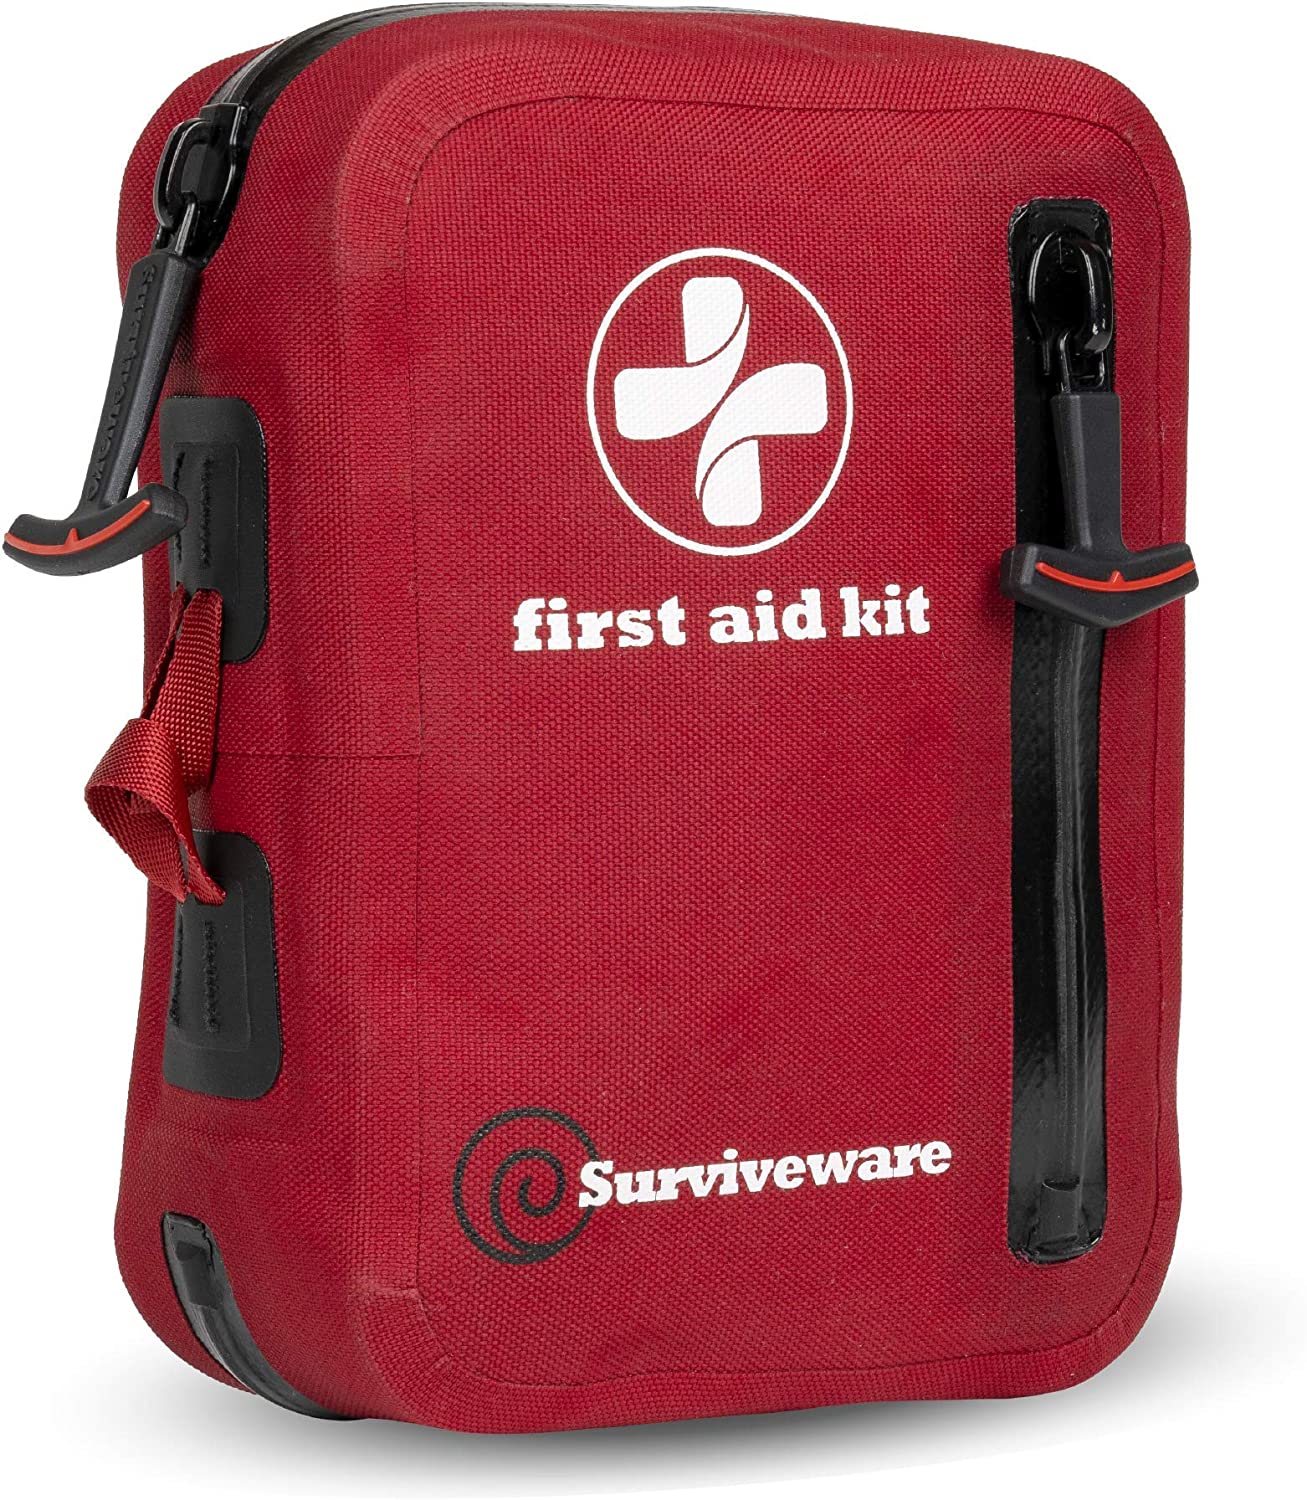 Surviveware Waterproof Premium First Aid Kit for Cars, Boats, Trucks, Hurricanes, Tropical Storms and Outdoor Emergencies – Small Kit – 100 Piece